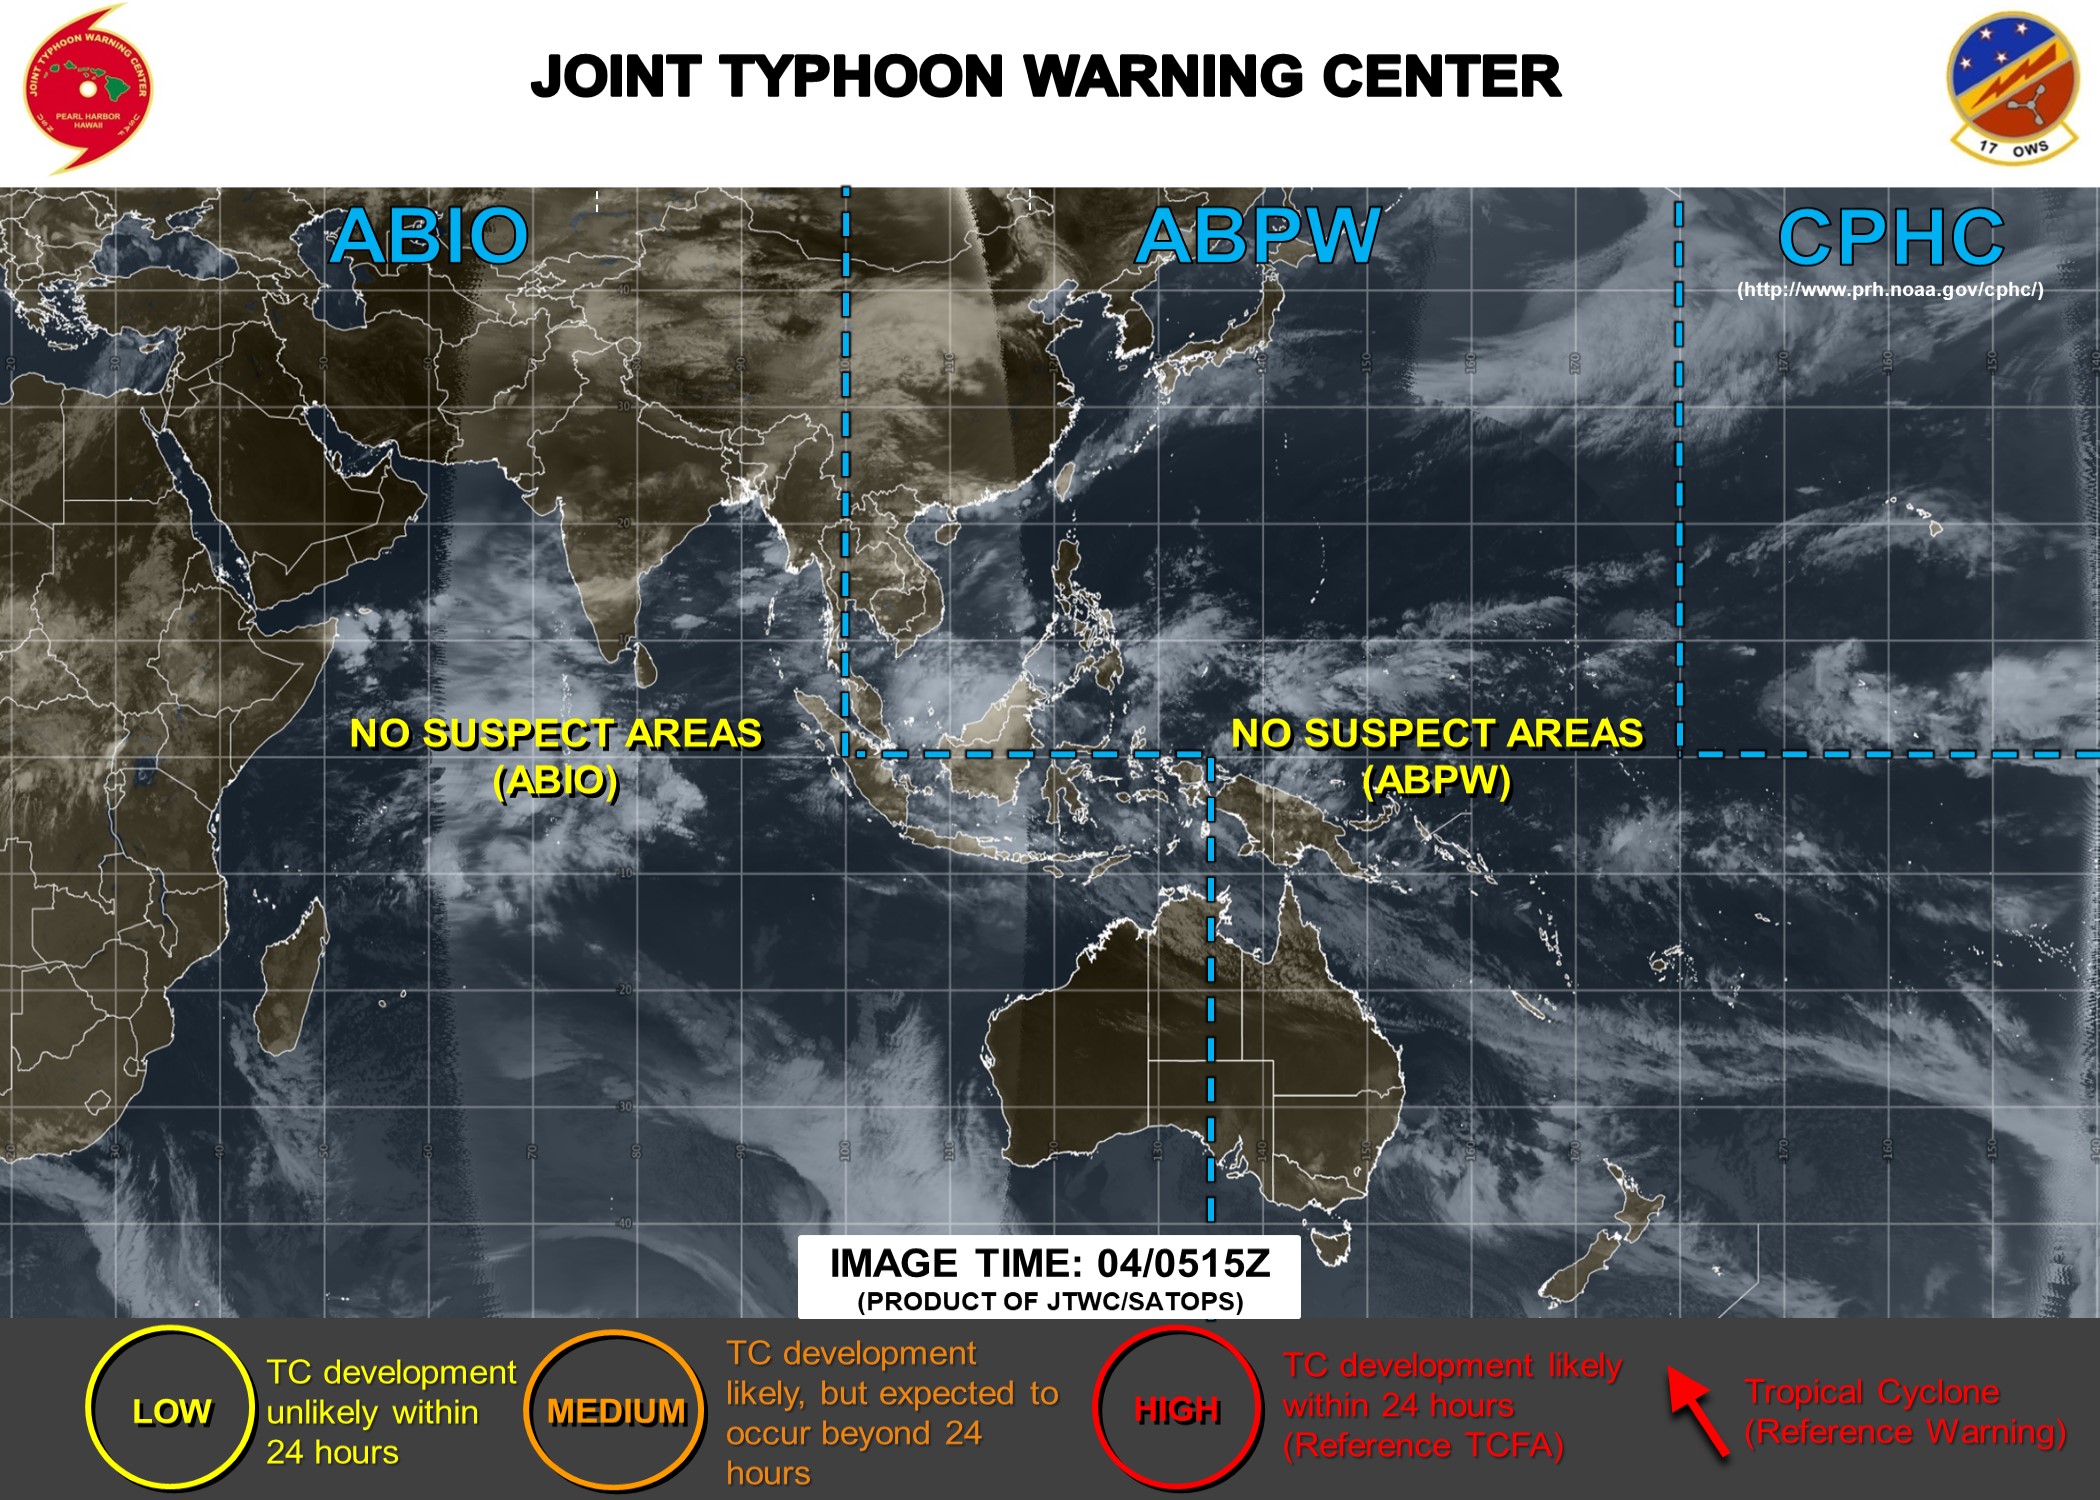 NO SUSPECT AREAS ACROSS THE JTWC AREA OF RESPONSABILITY AT THE MOMENT